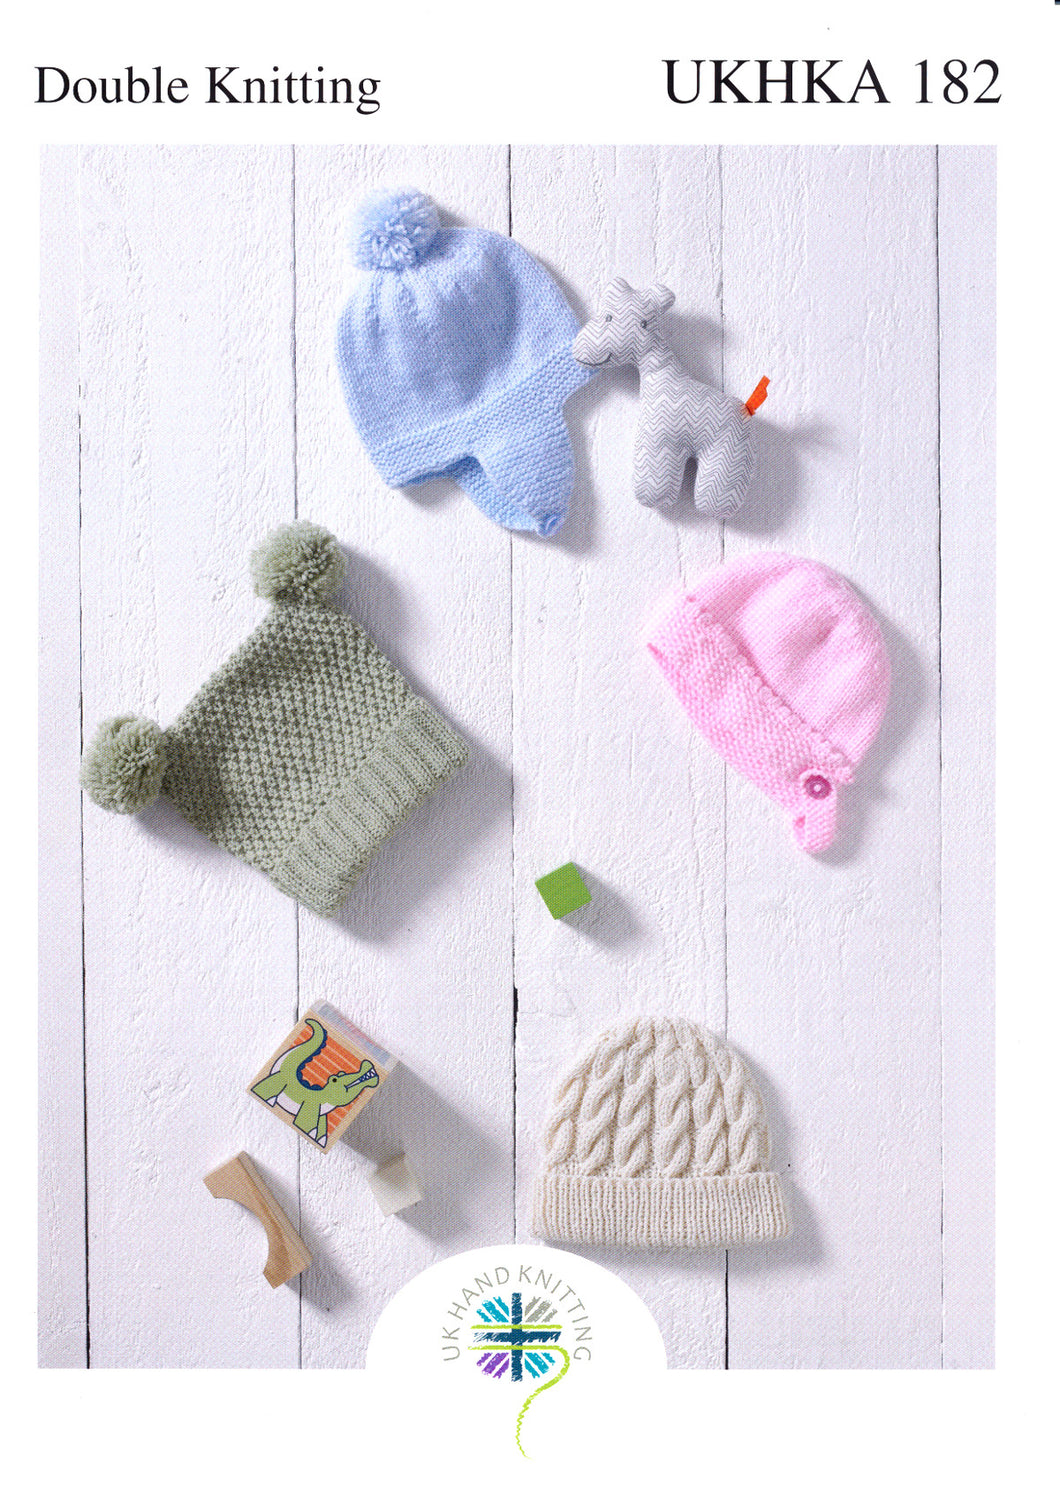 Double Knitting Pattern for Baby's Hats (UKHKA 182)